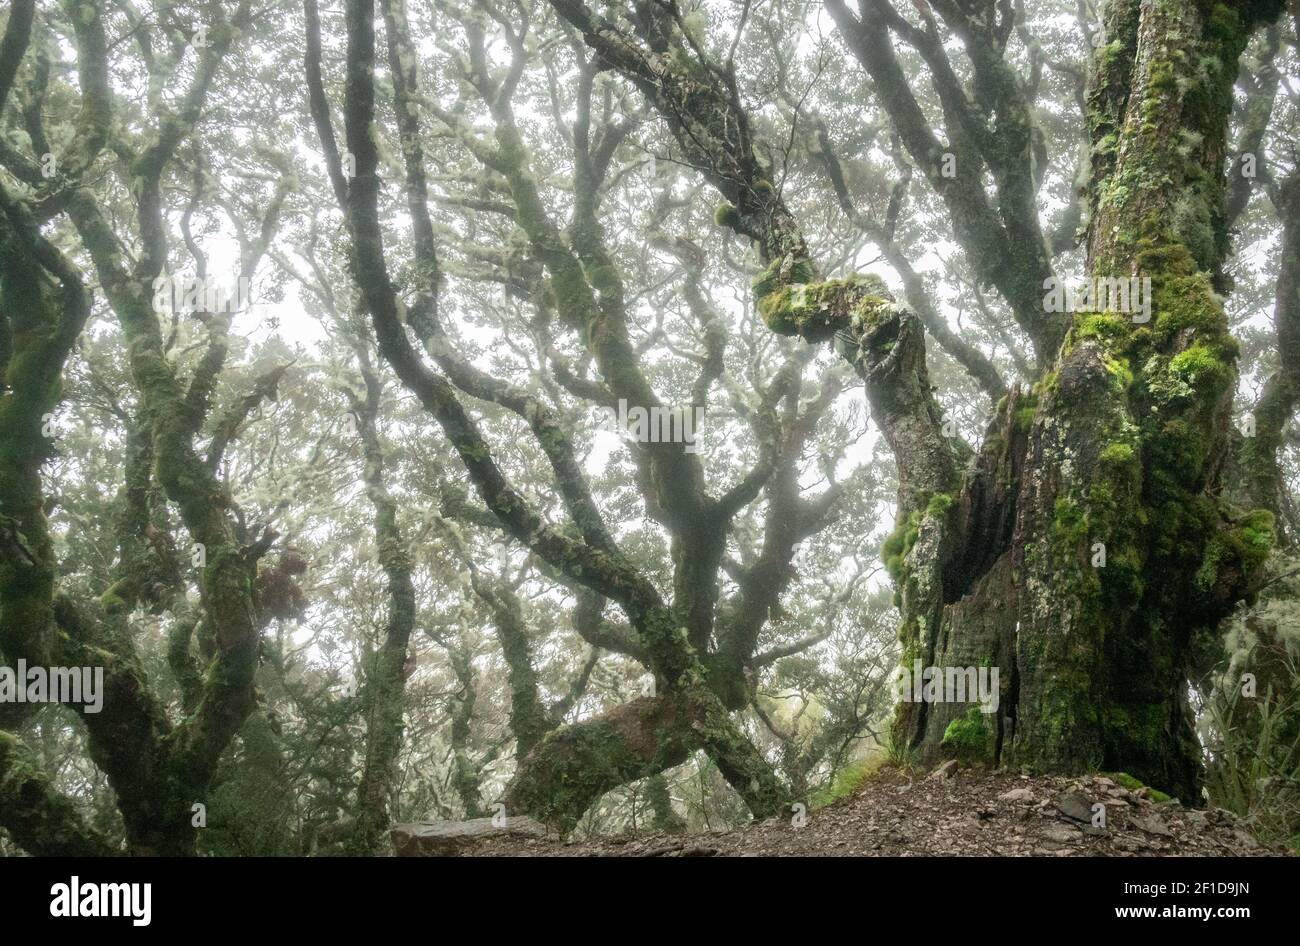 Spooky forest with gnarly trees shot during foggy conditions on Kepler Track, Fiordland National Park, New Zealand Stock Photo